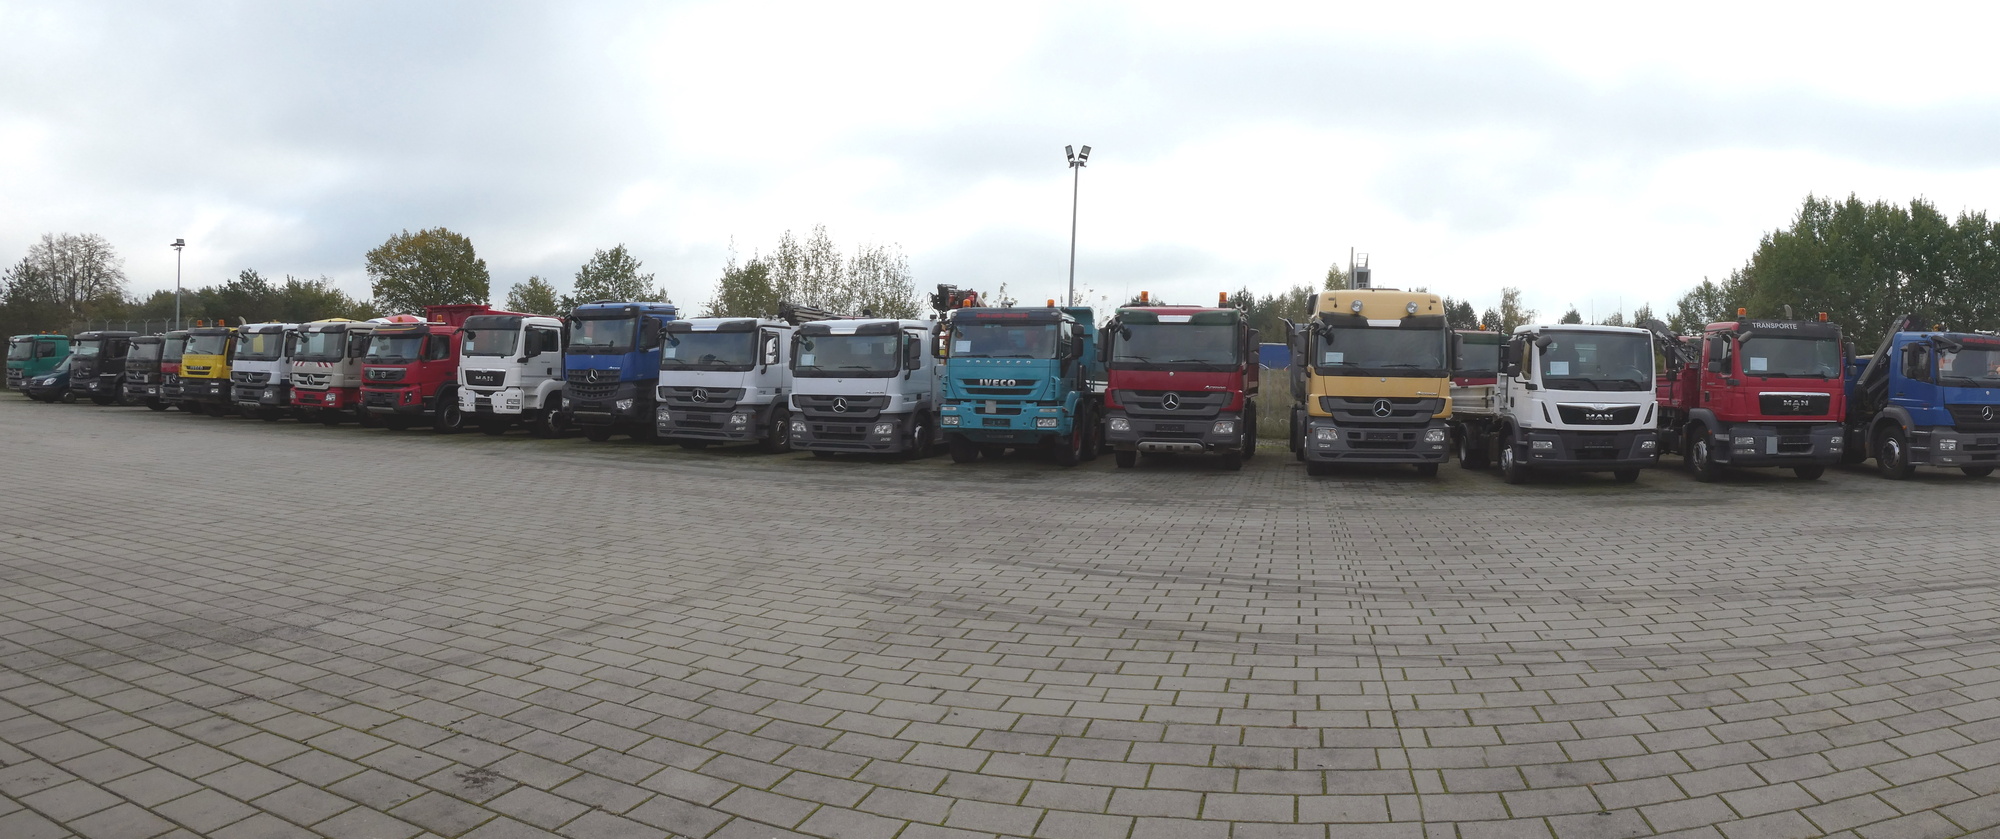 Henze Truck GmbH - vehicles for sale undefined: picture 1